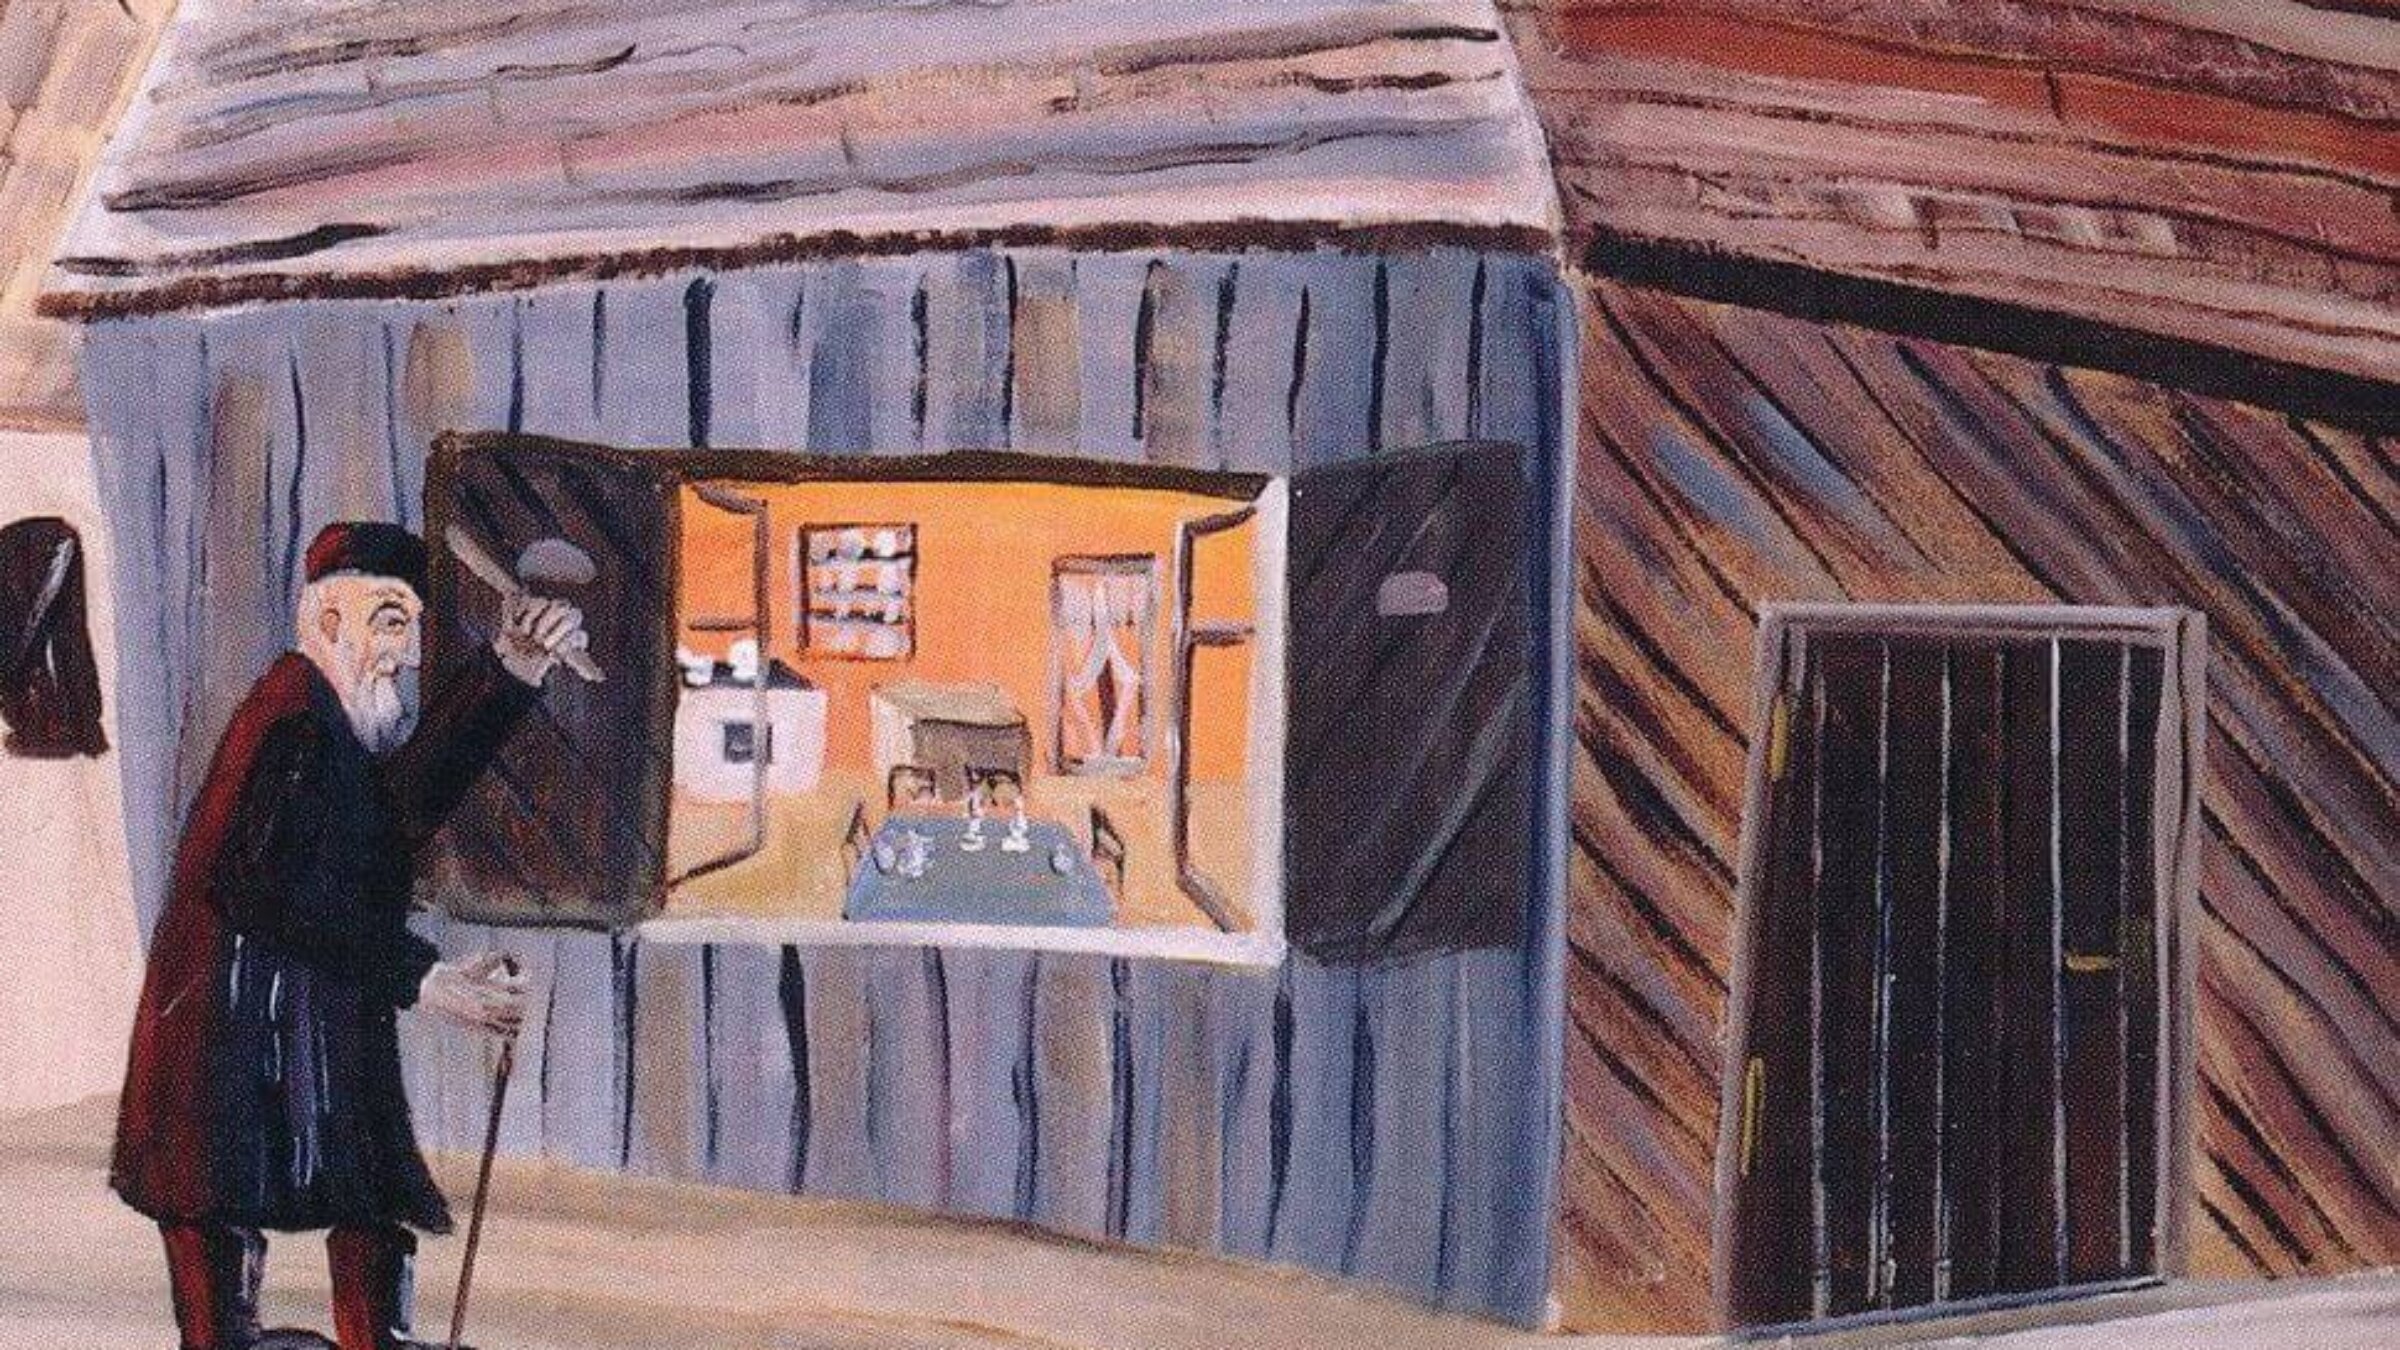 “Shulklaper”, c. 1995, from the book, “They Called Me Mayer July: Painted Memories of a Jewish Childhood in Poland Before the Holocaust” 